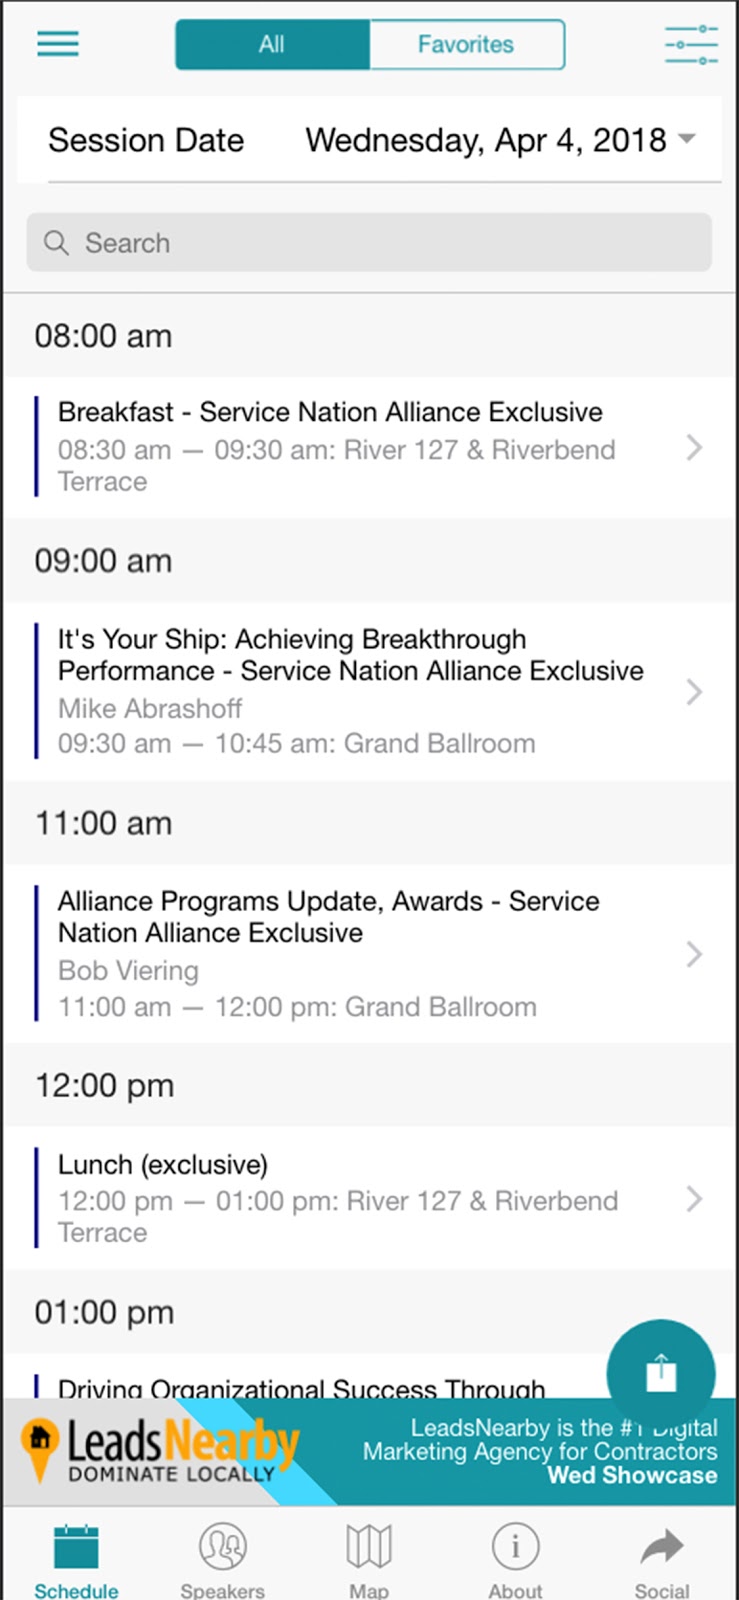 The Spring 2018 International Roundtable App has a Schedule Feature